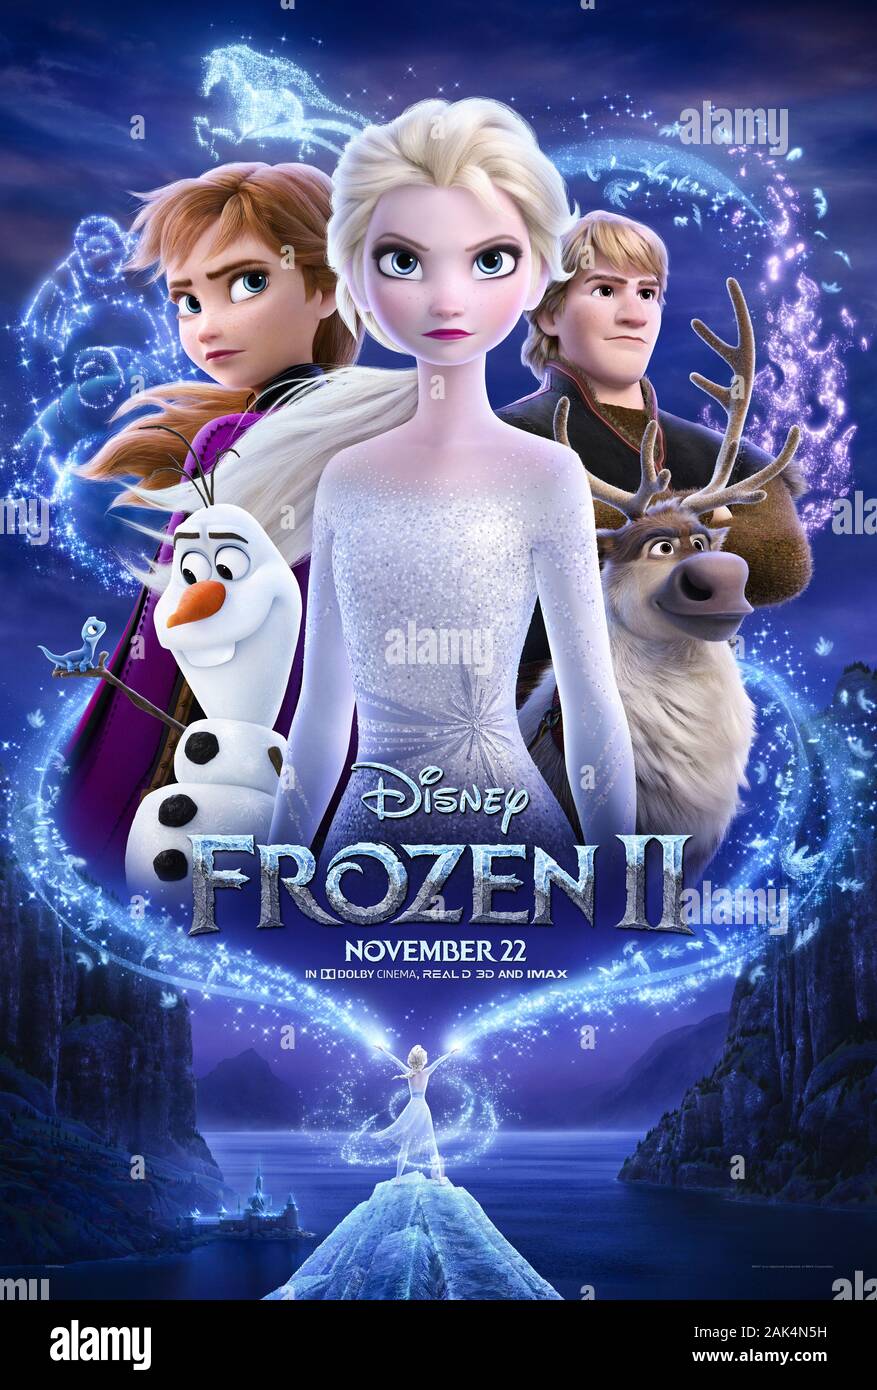 Frozen II (2019) directed by Chris Buck and Jennifer Lee and starring Kristen Bell, Idina Menzel, Josh Gad and Jonathan Groff. Anna, Elsa, Kristoff, Olaf and Sven return for more heart-warming adventure in the kingdom of Arendelle Stock Photo